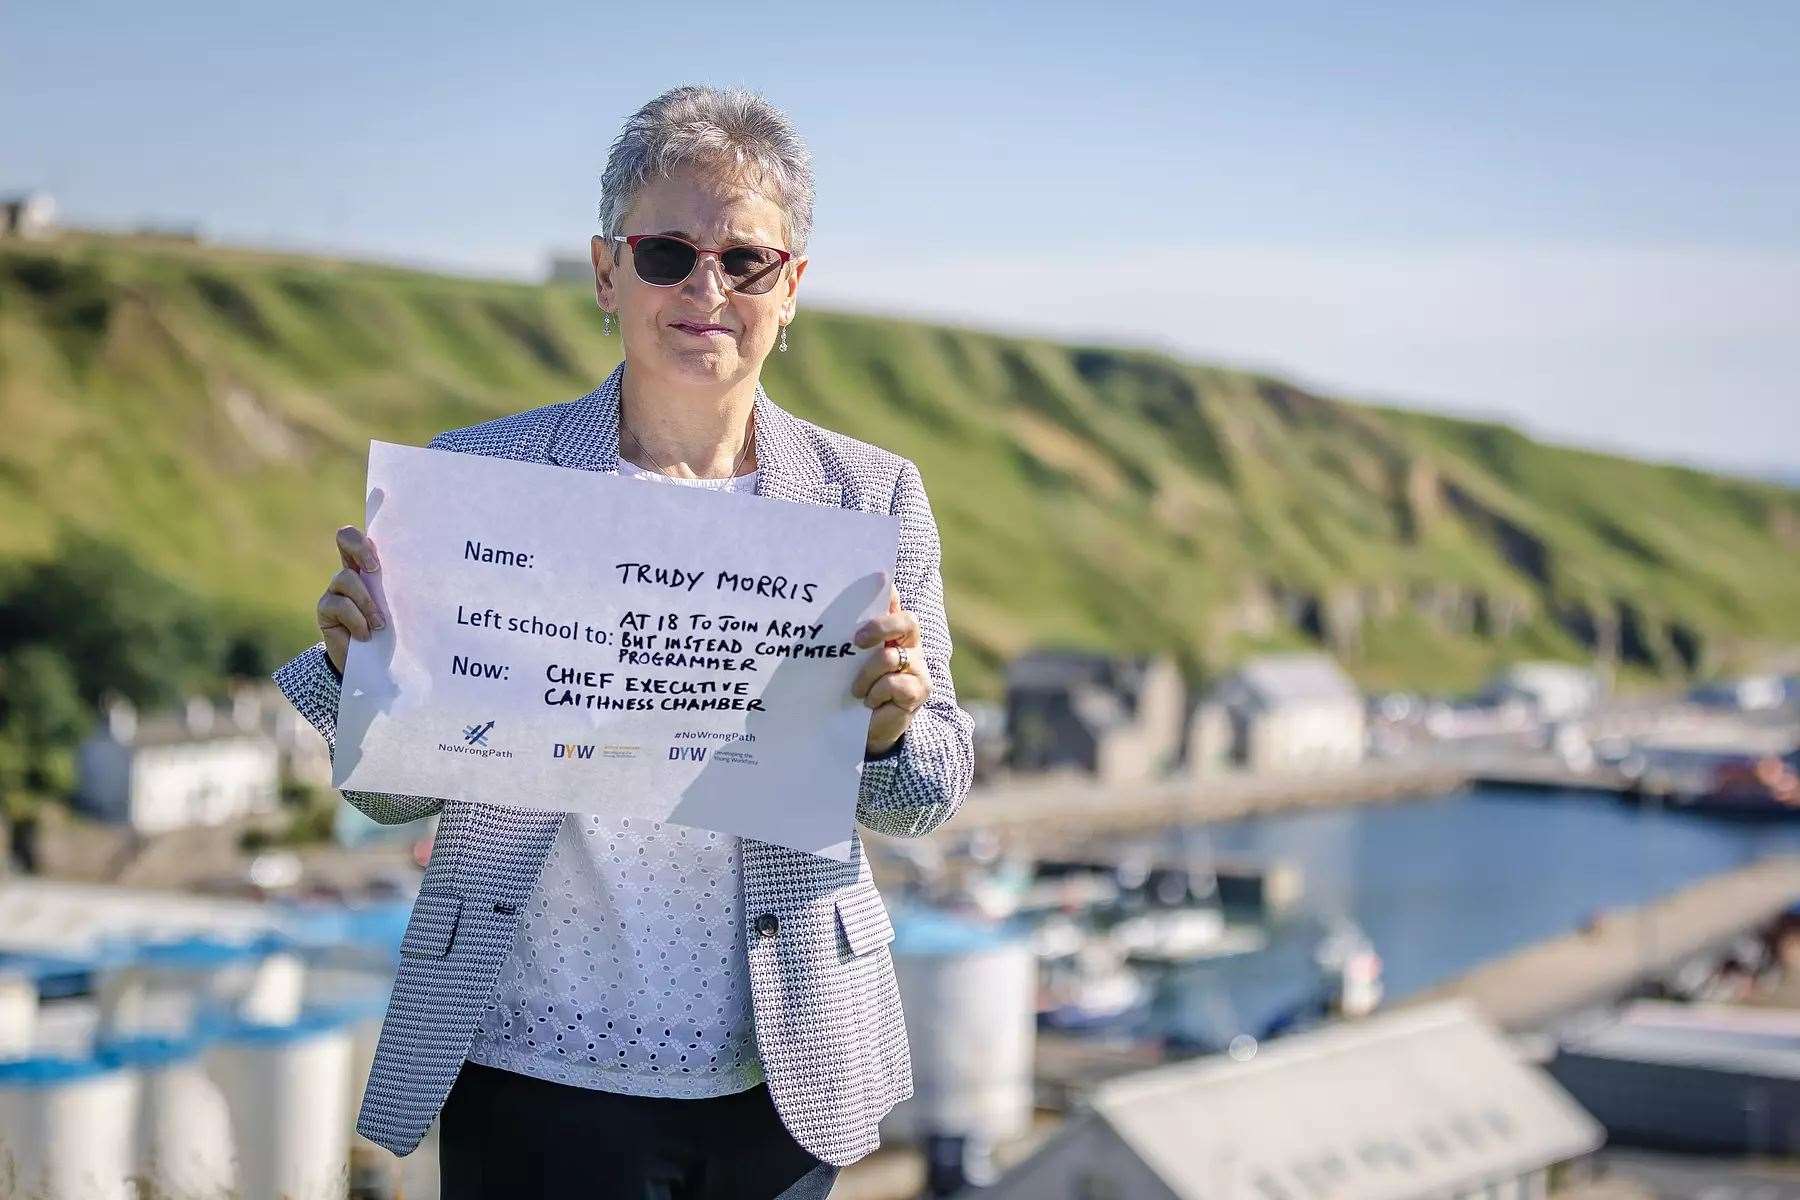 Trudy Morris with her own message about #NoWrongPath.